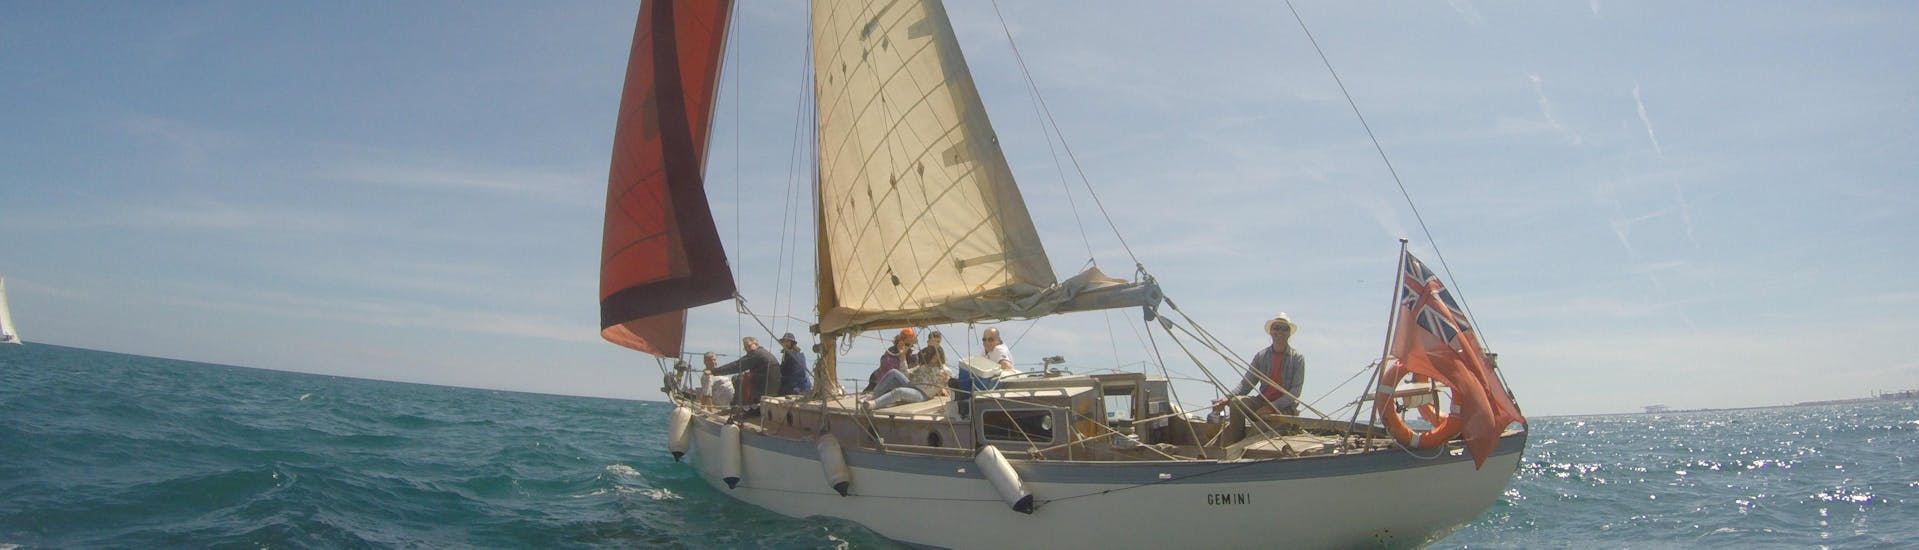 Exclusive Vintage Wooden Sailboat Cruise from Barcelona.